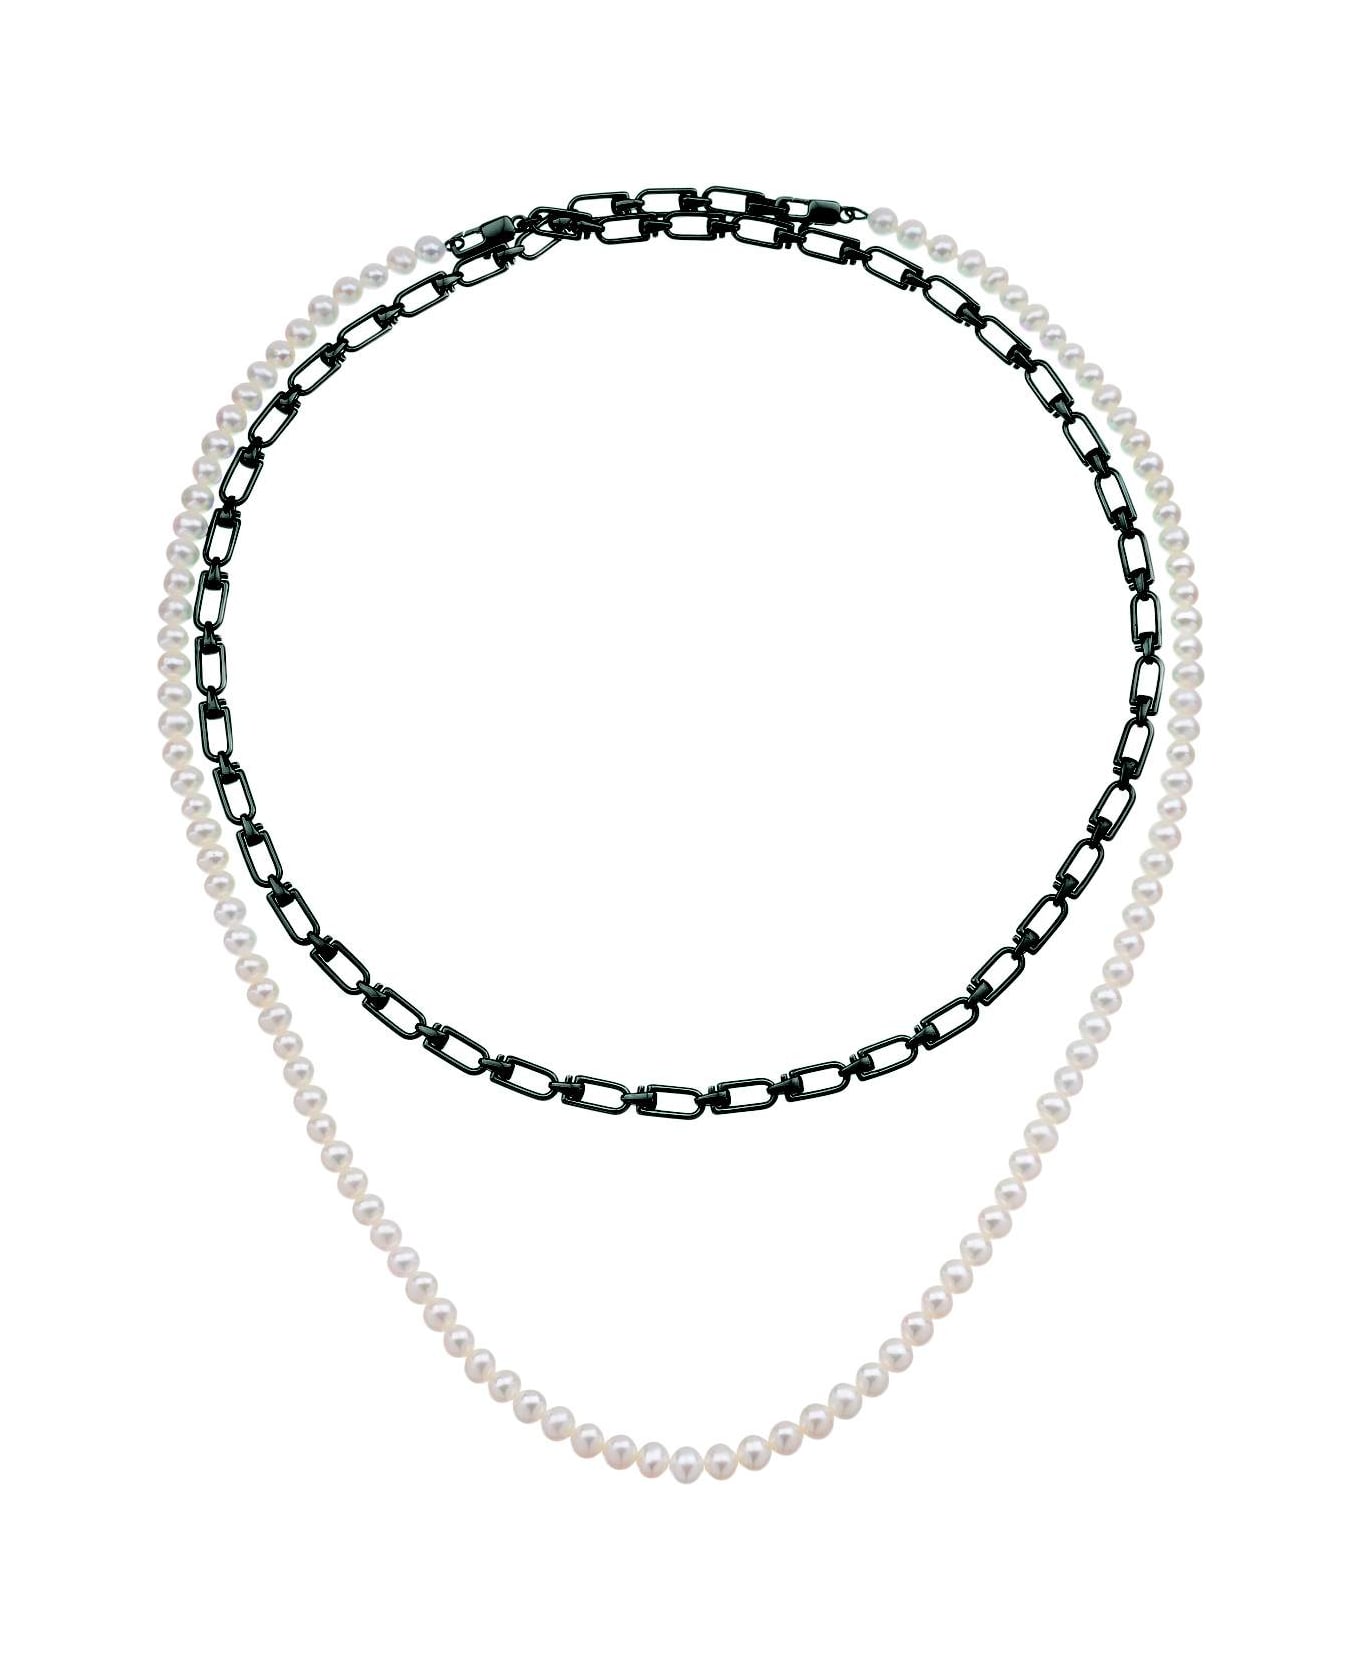 EÉRA 'reine' Double Necklace With Pearls - SILVER BLACK (White)